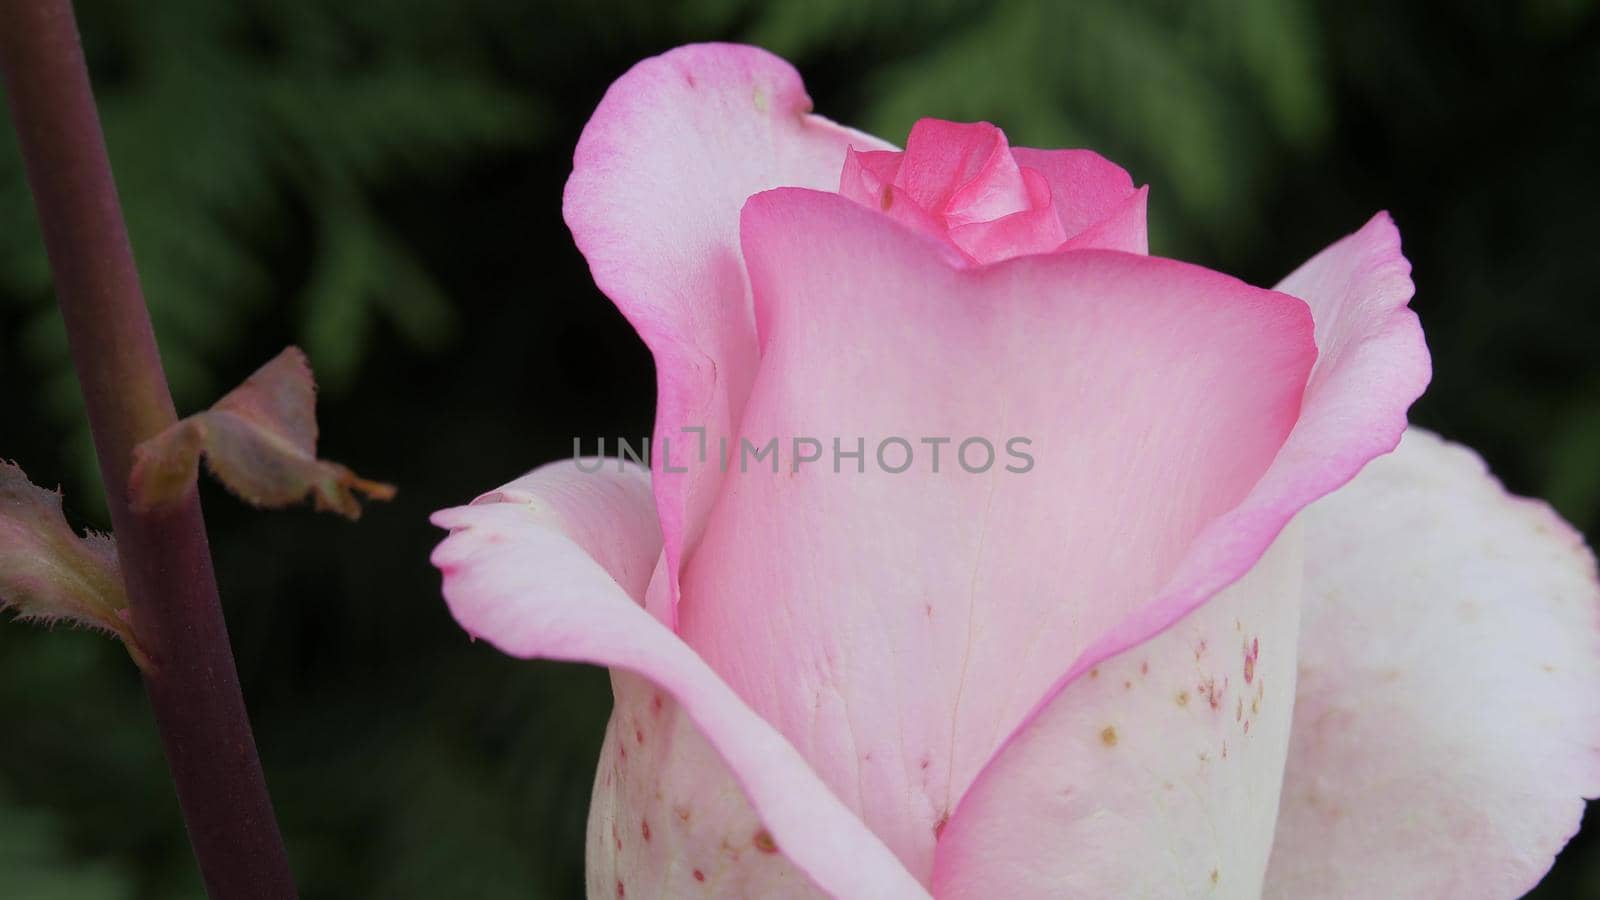 Camera moves along the bud of a red garden rose. Background with red flower petals. A flower in its natural habitat.